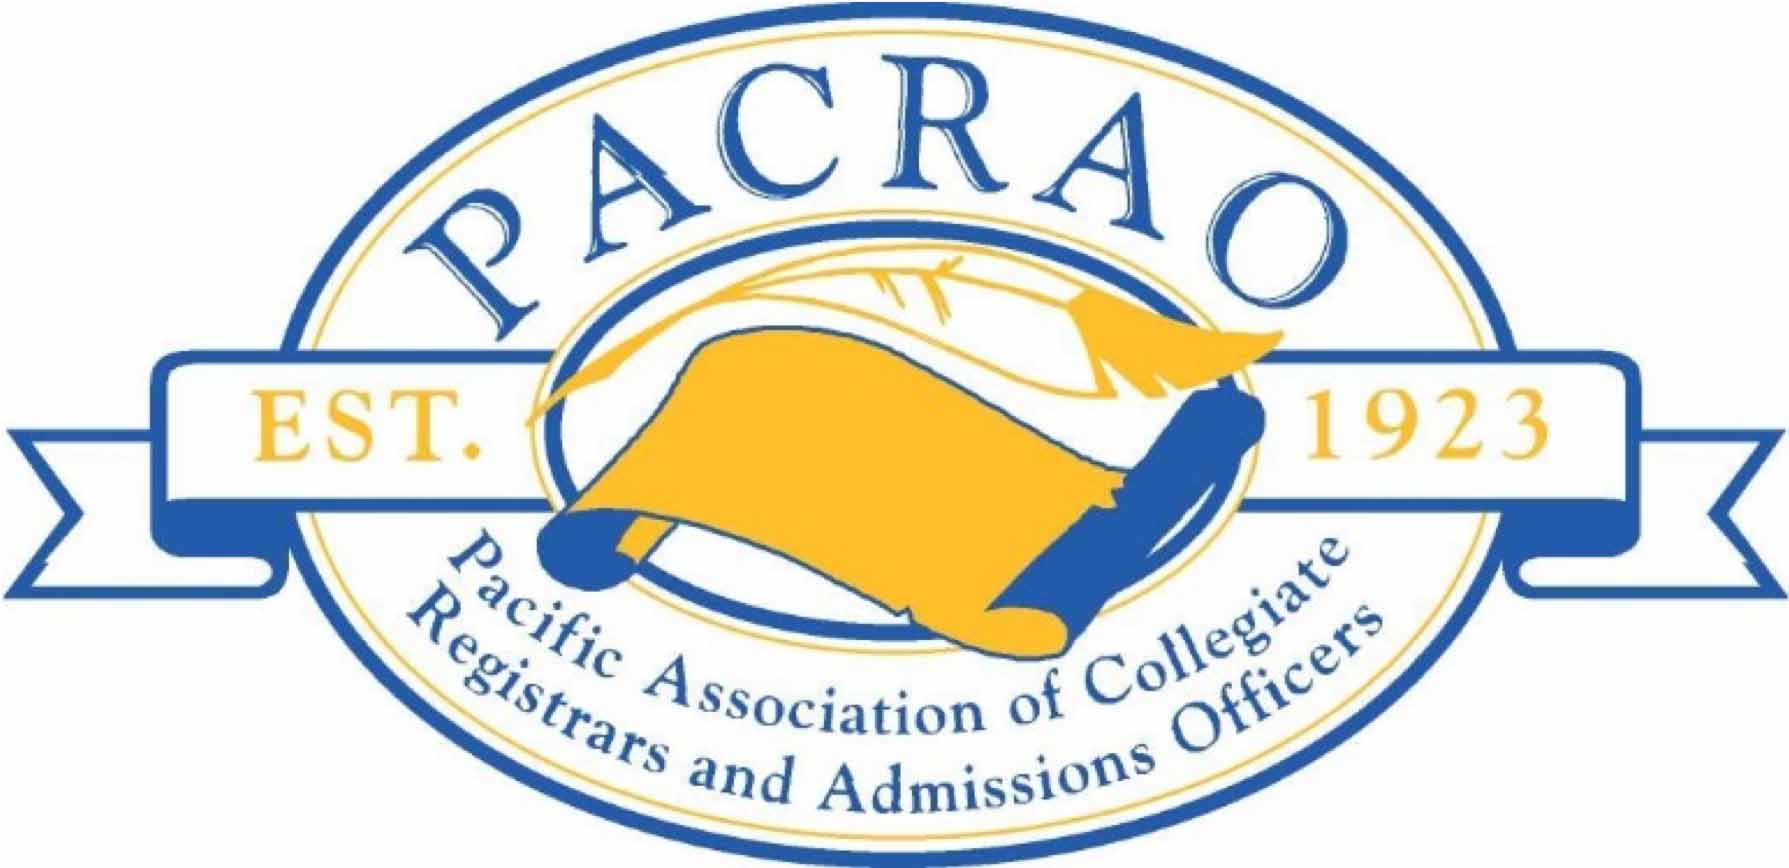 plain background with a yellow quill and paper in the center and the text "PACRAO, Pacific Association of Collegiate Registrars and Admissions Officers, 1923" 